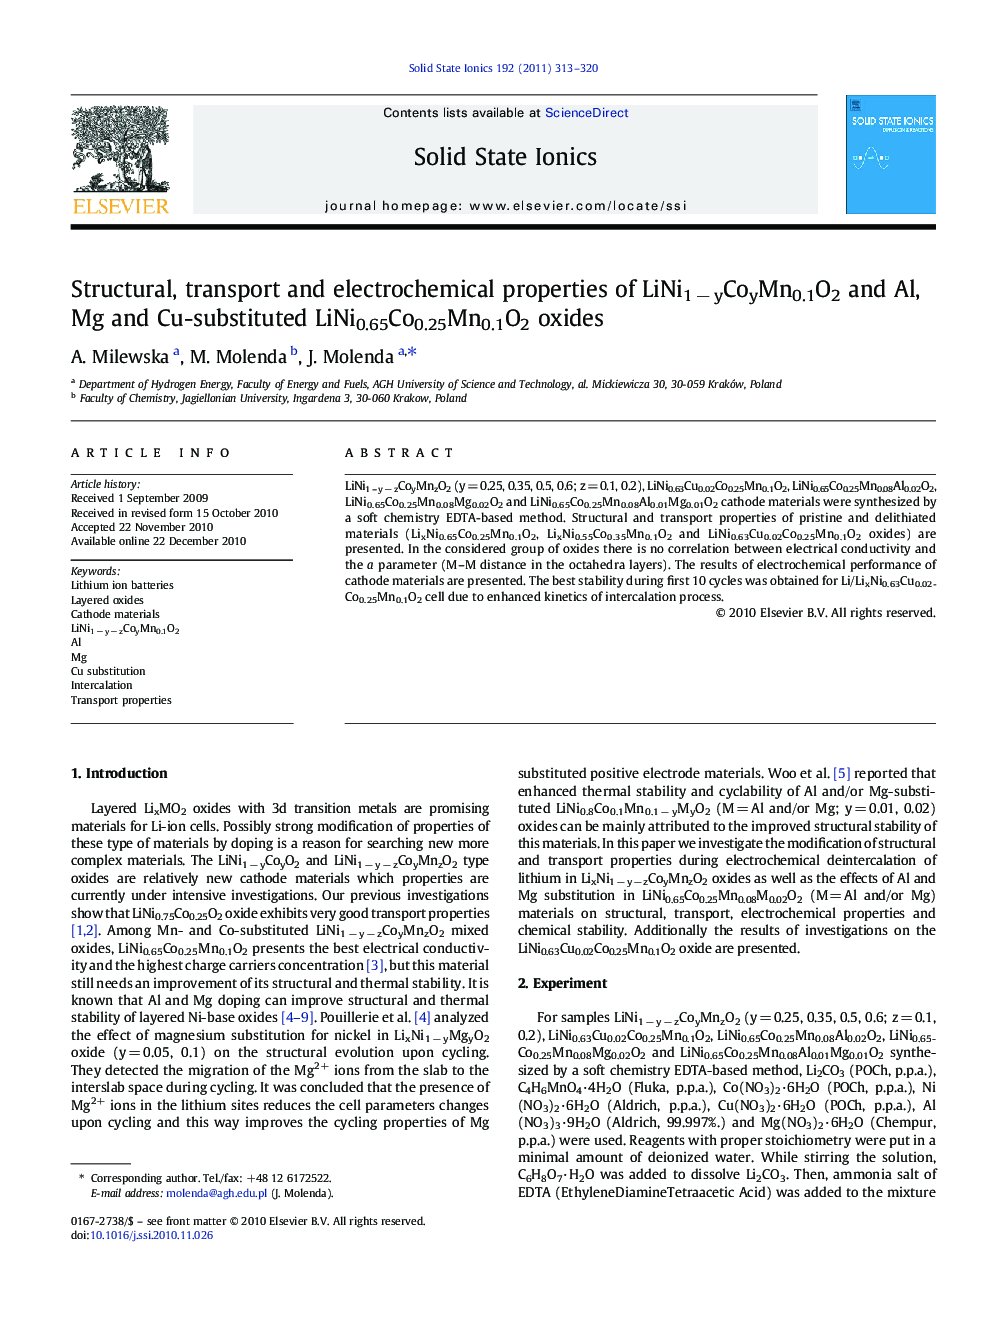 Structural, transport and electrochemical properties of LiNi1 − yCoyMn0.1O2 and Al, Mg and Cu-substituted LiNi0.65Co0.25Mn0.1O2 oxides